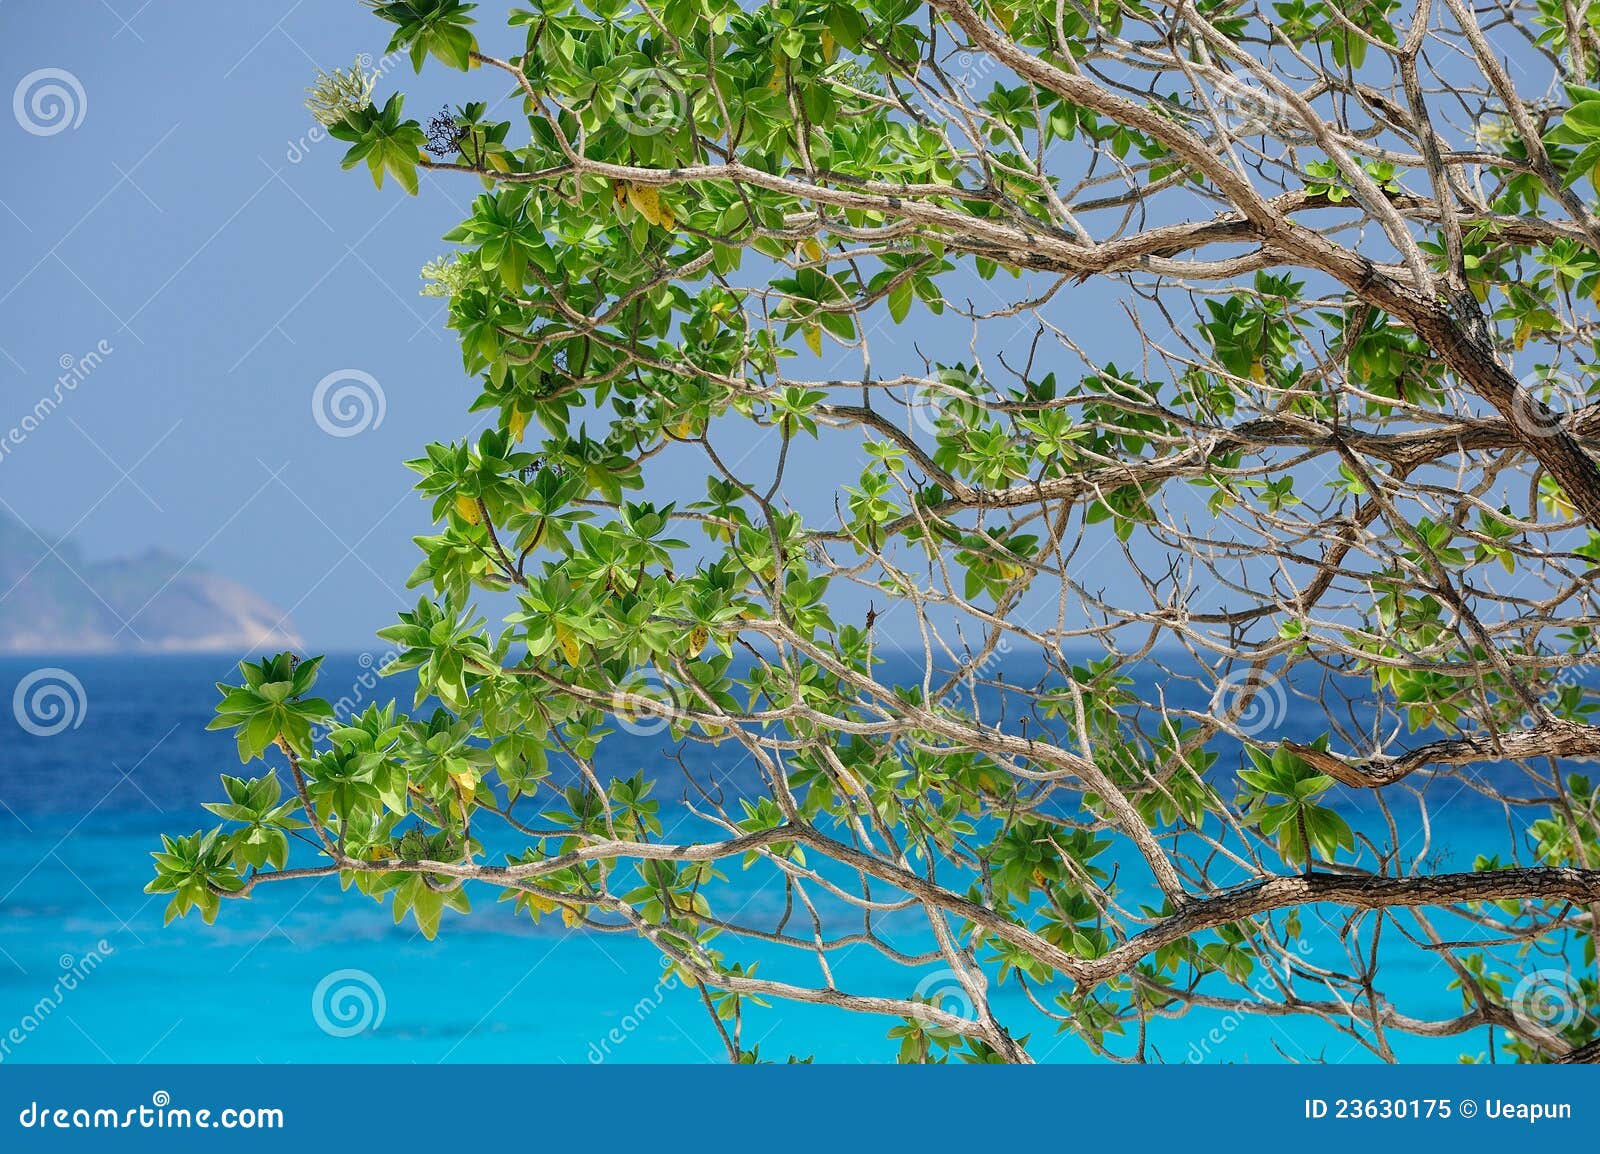 Tree branches with sea stock image. Image of brown, tour - 23630175